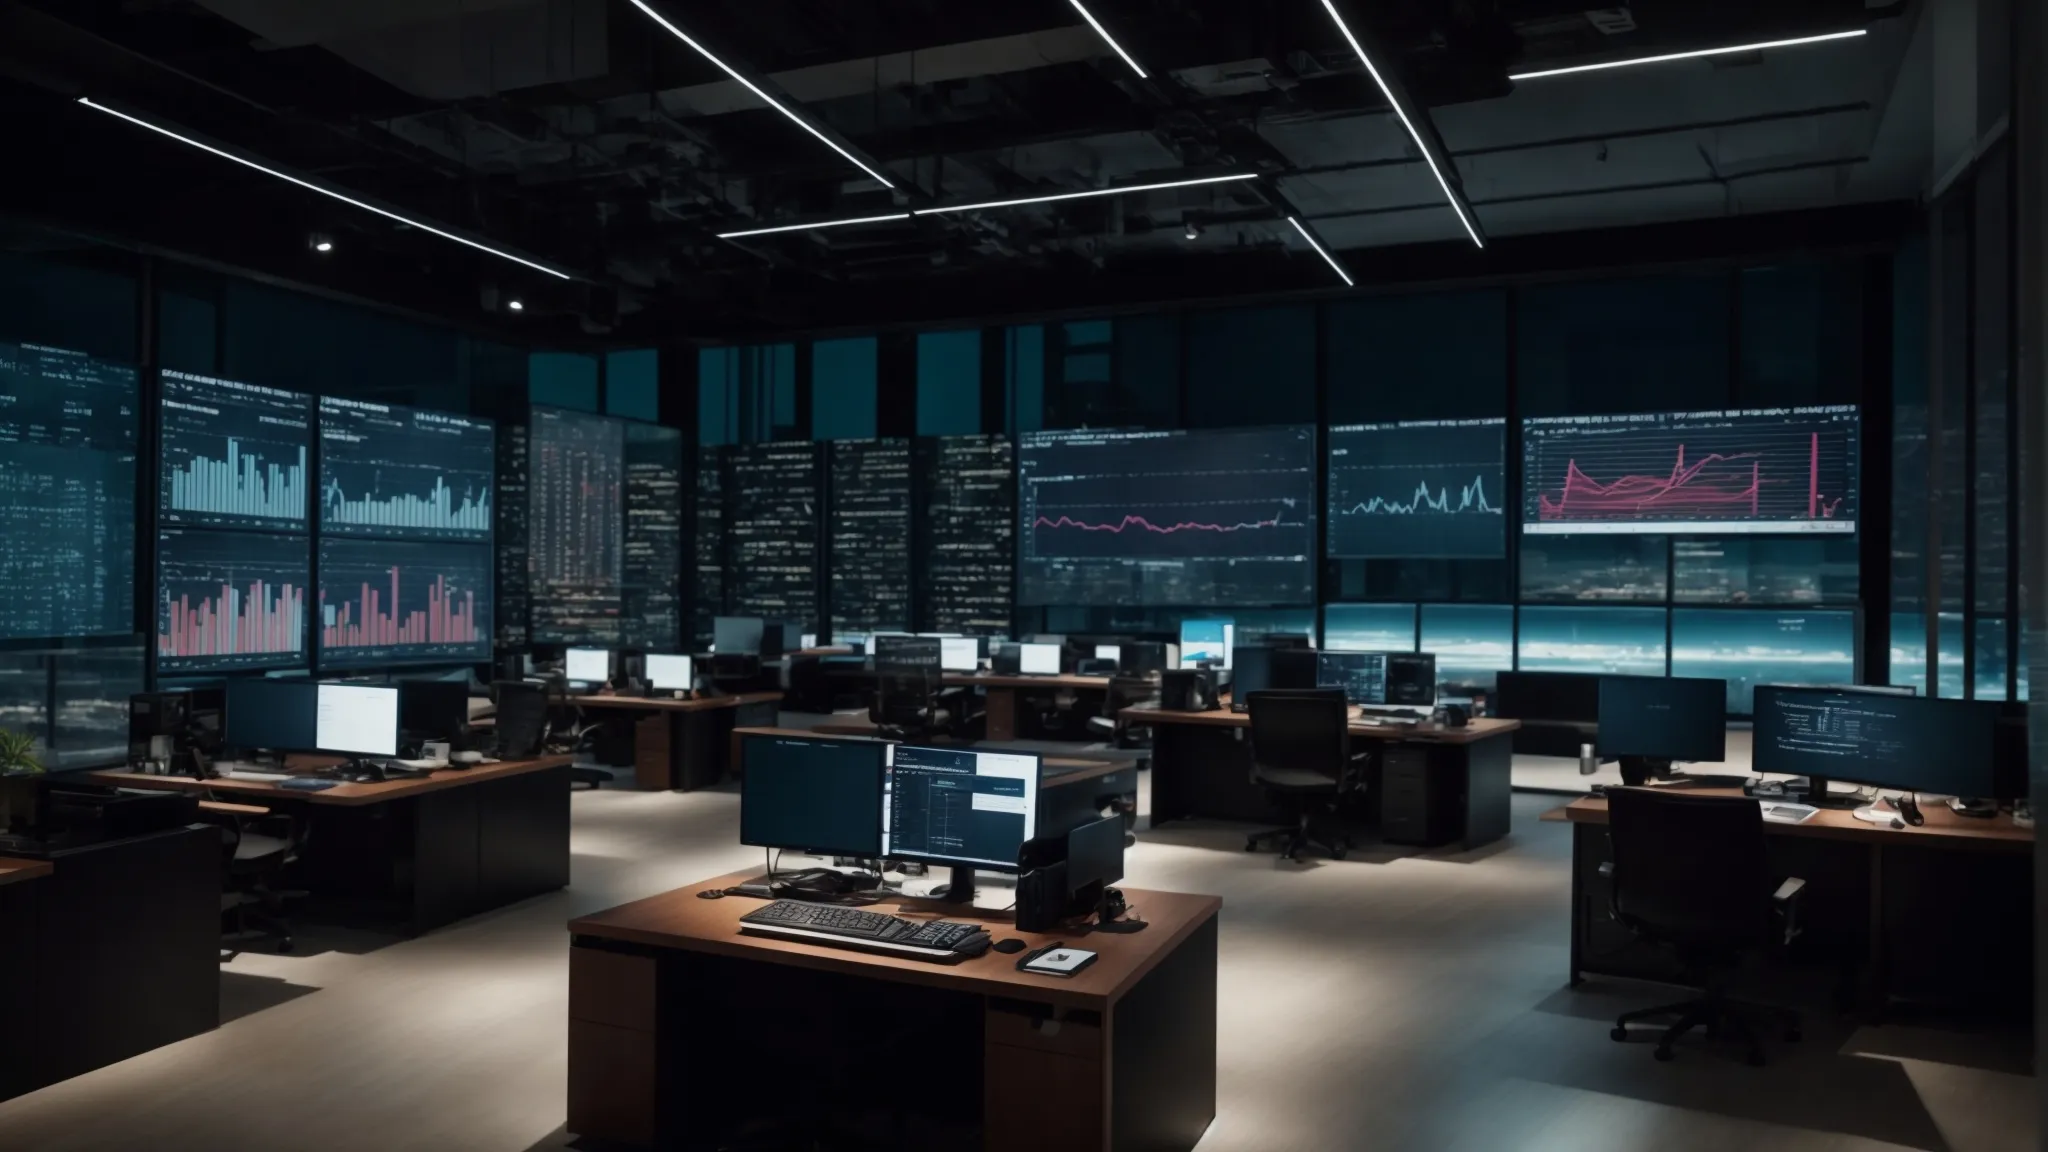 a sleek, modern office filled with screens displaying graphs and data analytics.